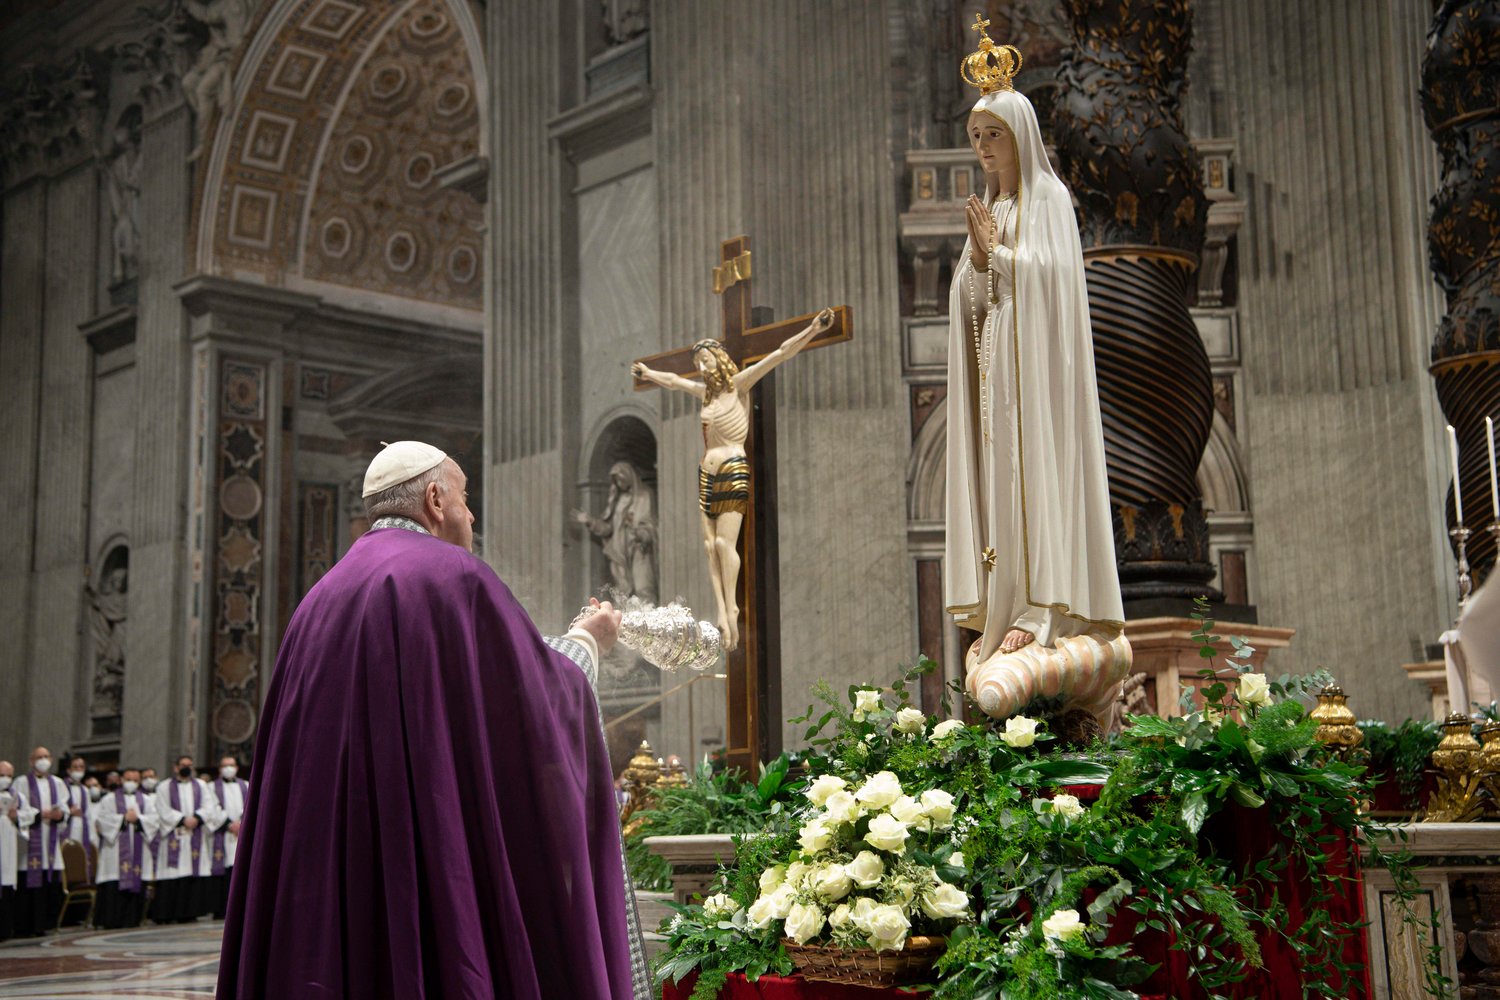 Pope Francis burns incense in front of a Marian statue after consecrating the world and, in particular, Ukraine and Russia to the Immaculate Heart of Mary during a Lenten penance service in St. Peter's Basilica at the Vatican March 25, 2022.